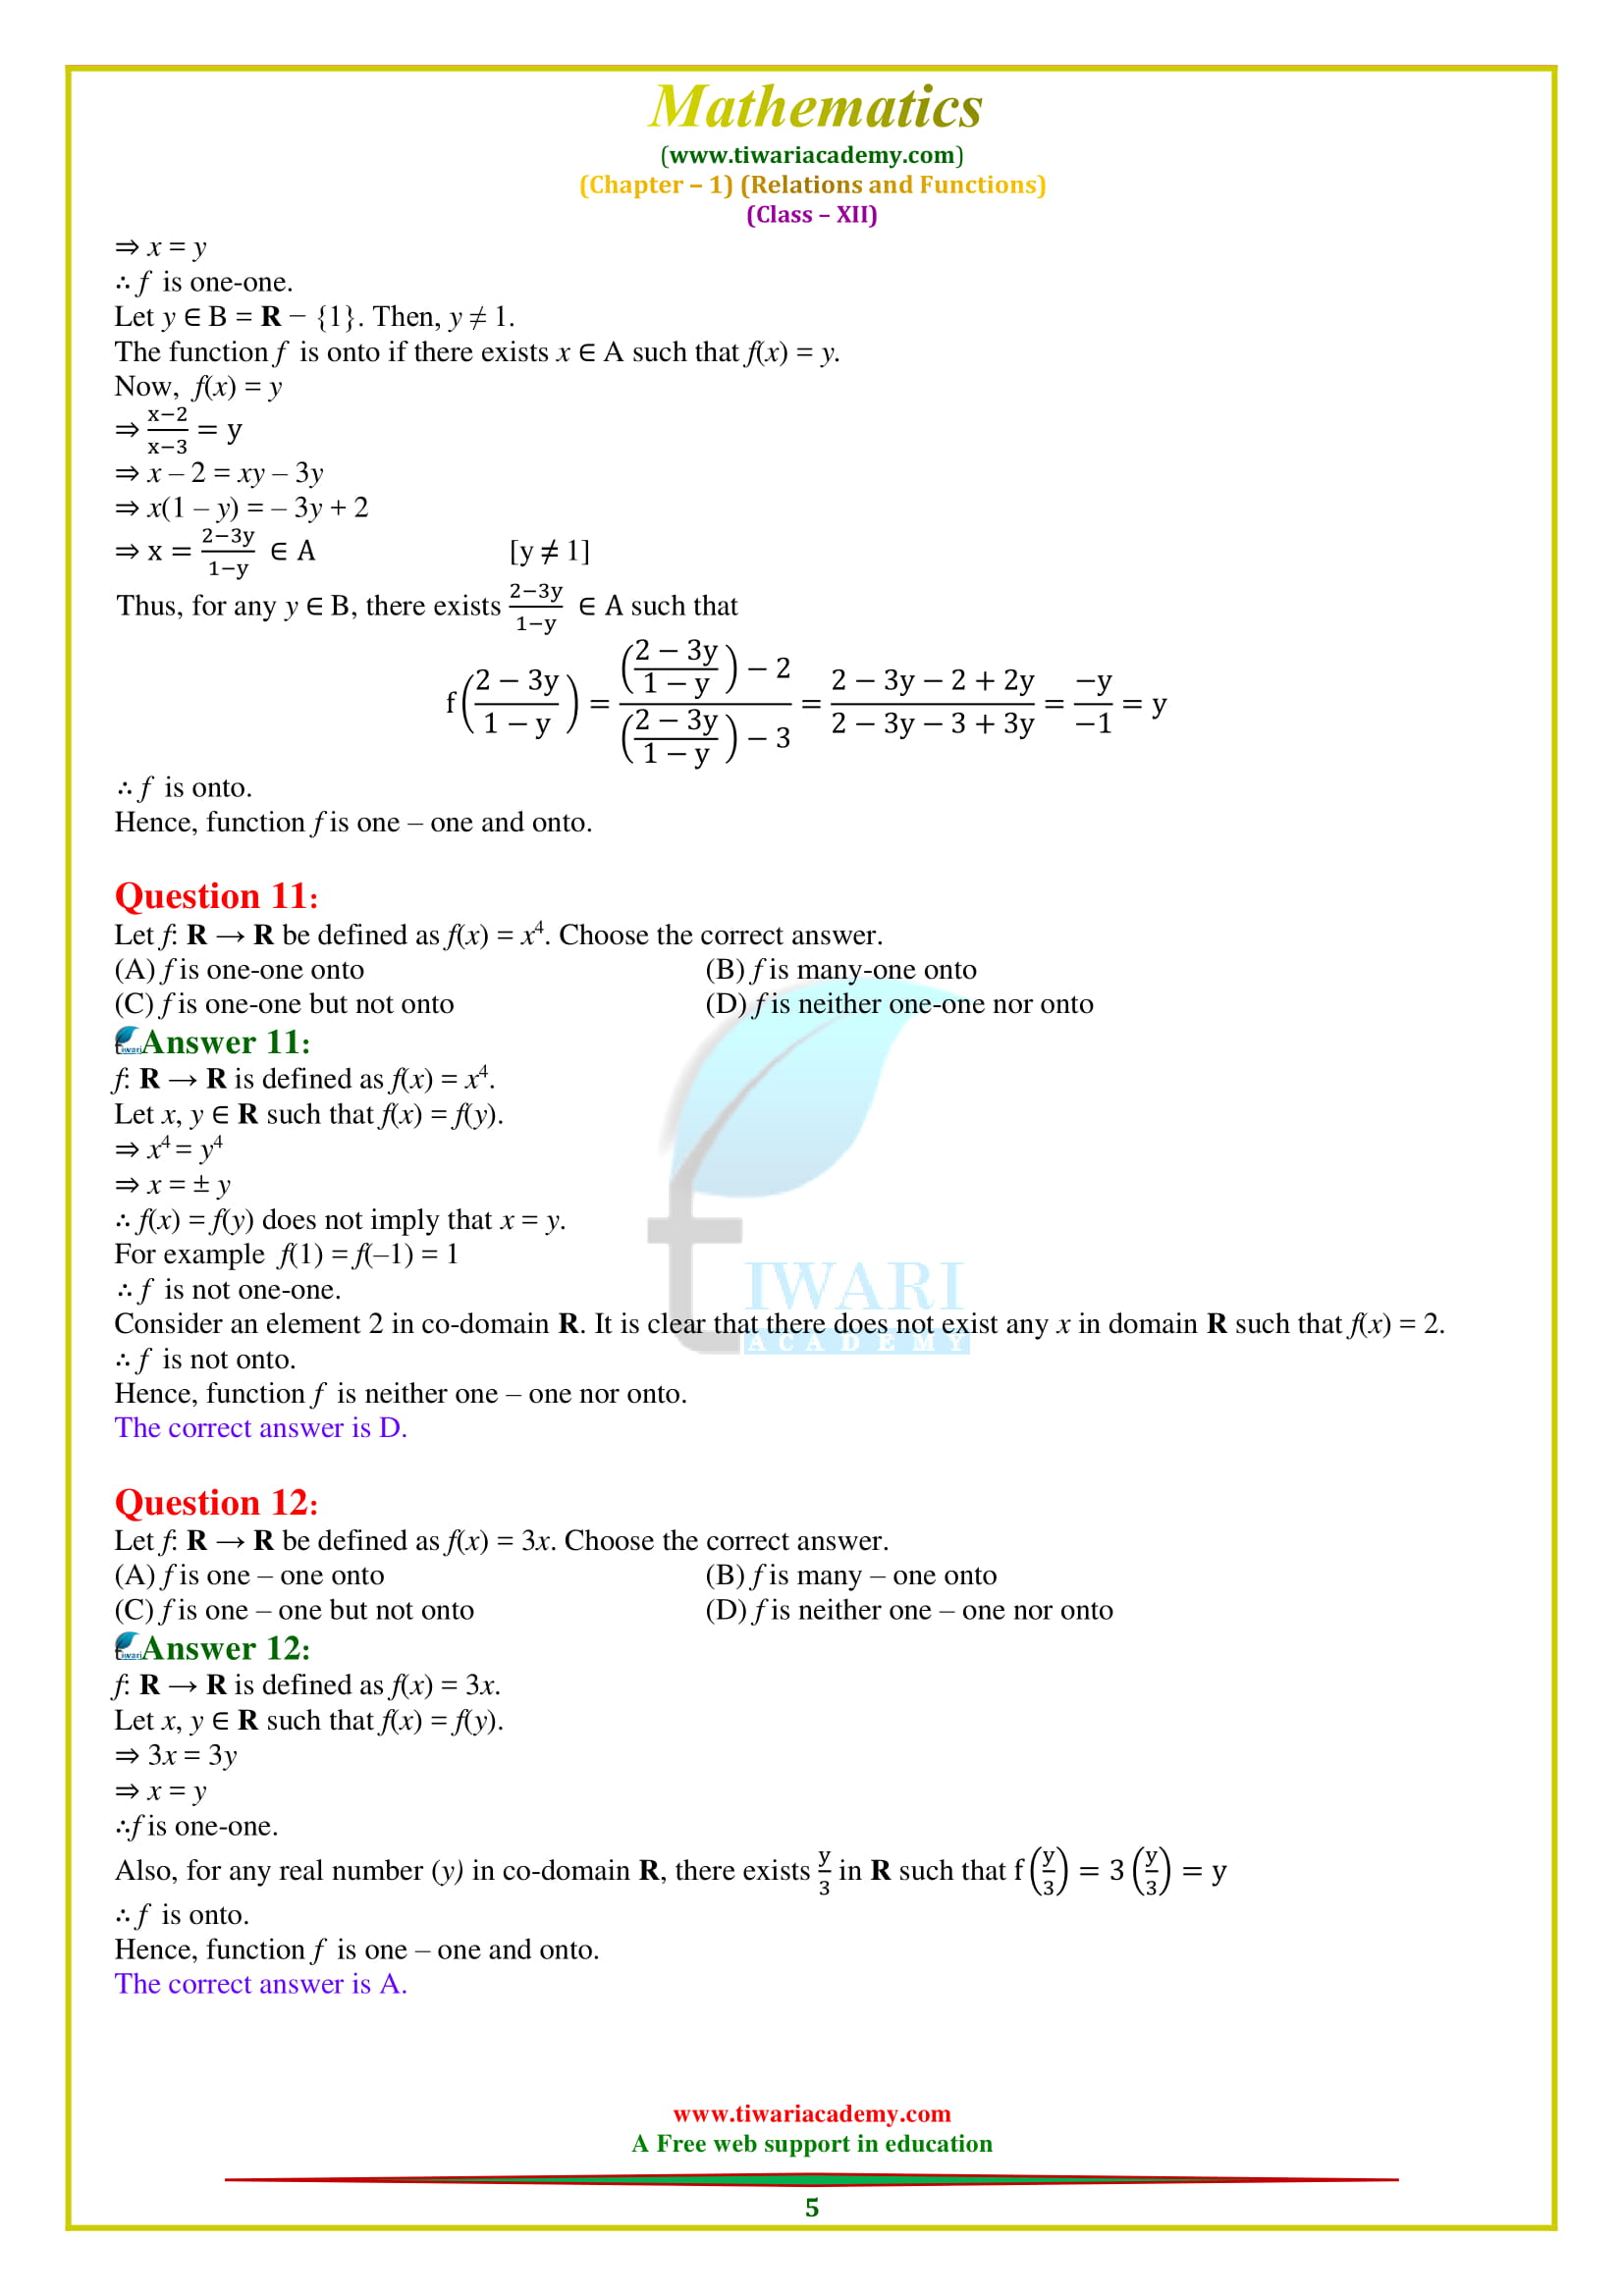 NCERT Solutions for Class 12 Maths Chapter 1 Exercise 1.2 question 1, 2, 3, 4, 5, 6, 7, 8, 9, 10, 11.